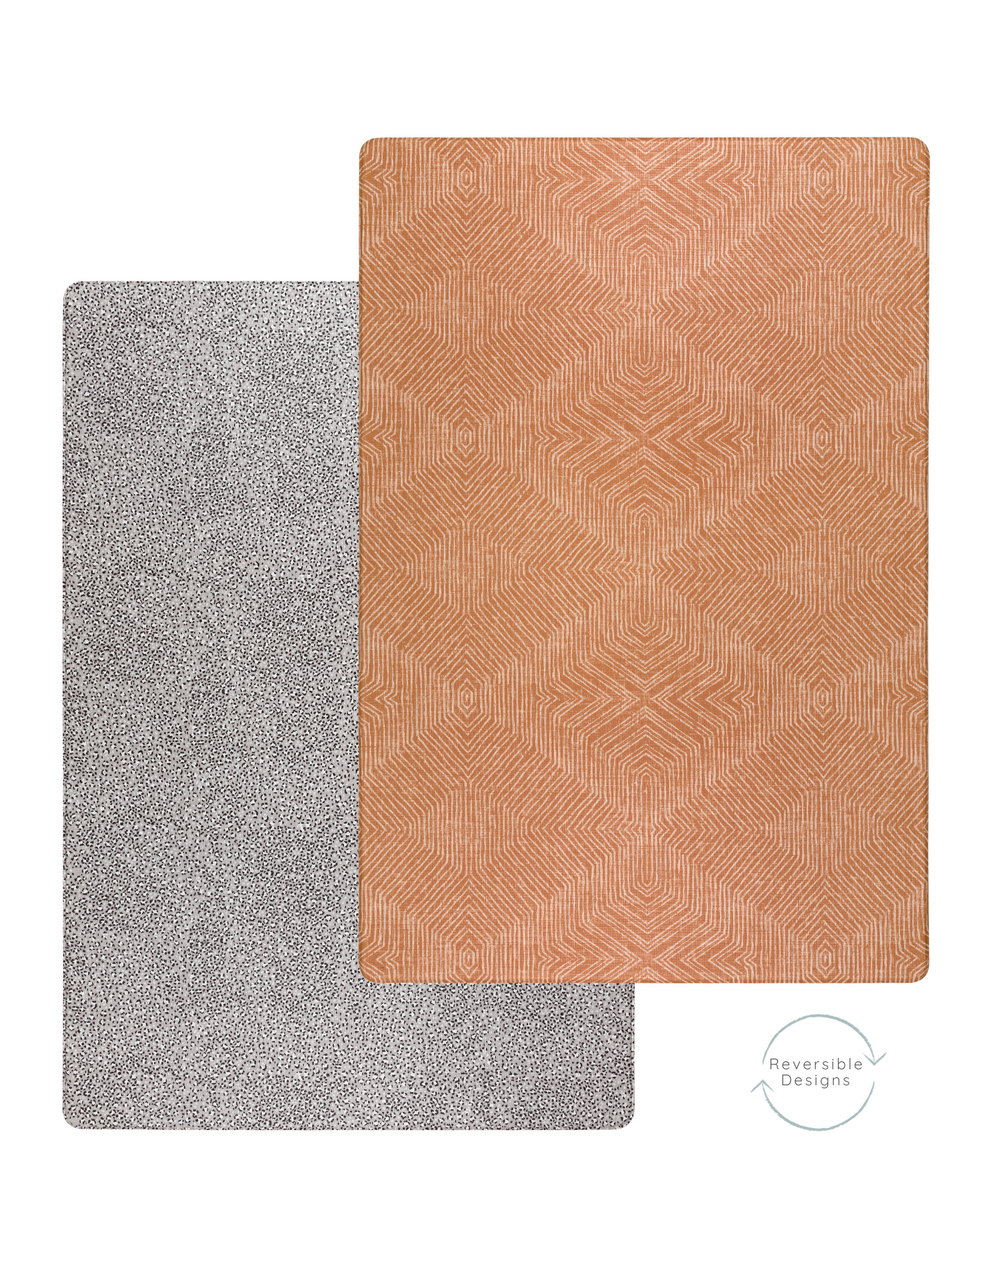 A reversible play mat with a gentle and timeless aesthetic